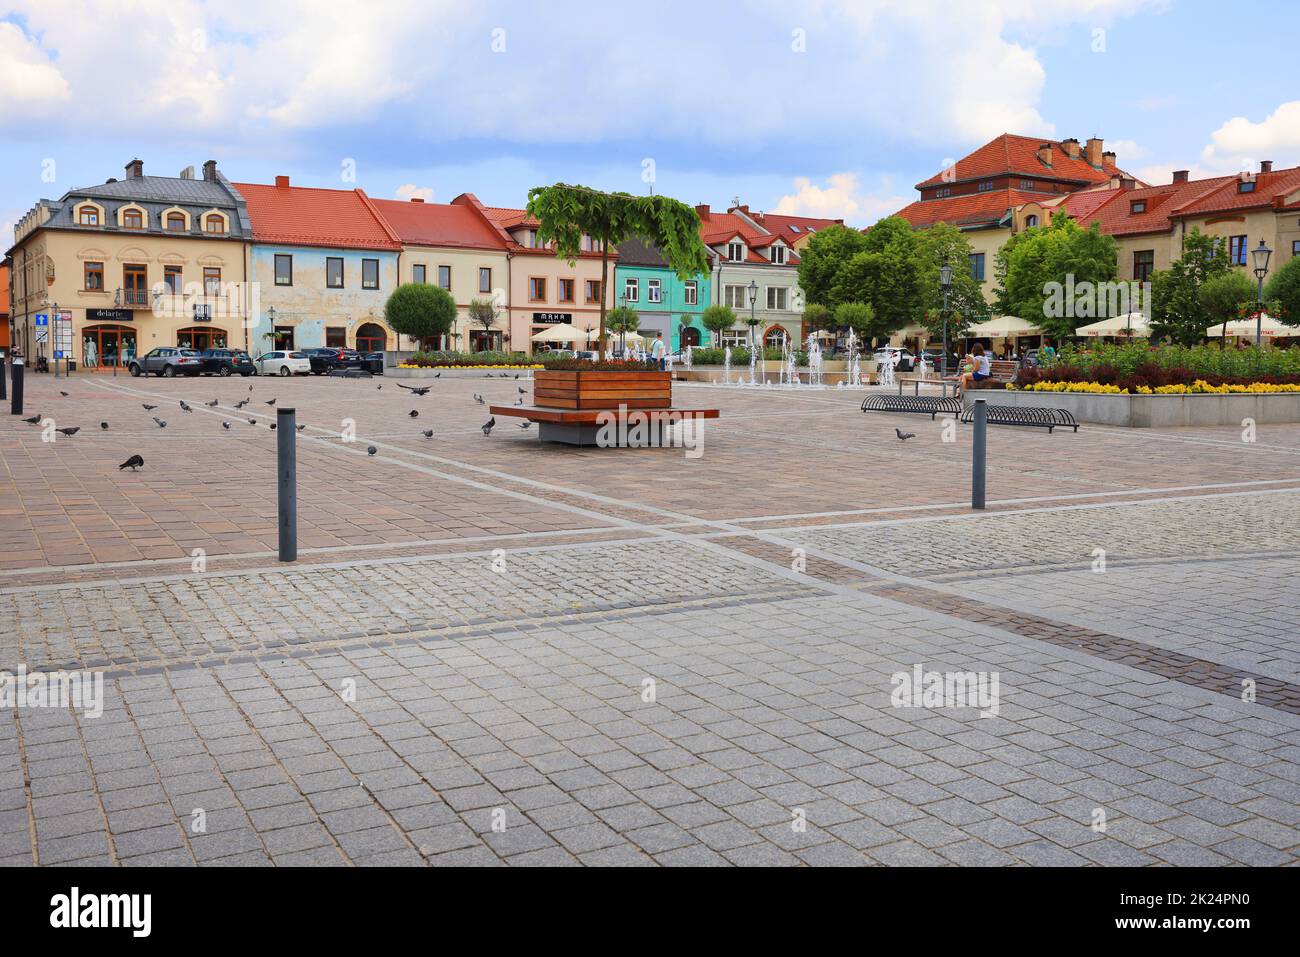 Olkusz, Poland - June 9, 2021: Market square in a small town near Krakow, colorful houses and a fountain Stock Photo